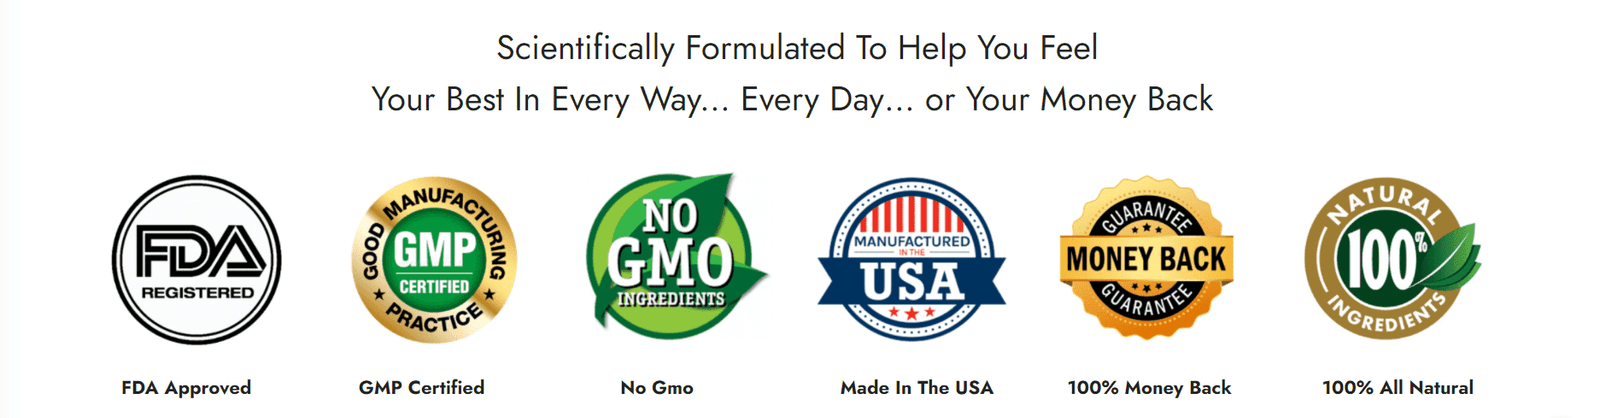 fda approved-gmp certified-no gmo-made in the usa-100% money back-100% allnatural